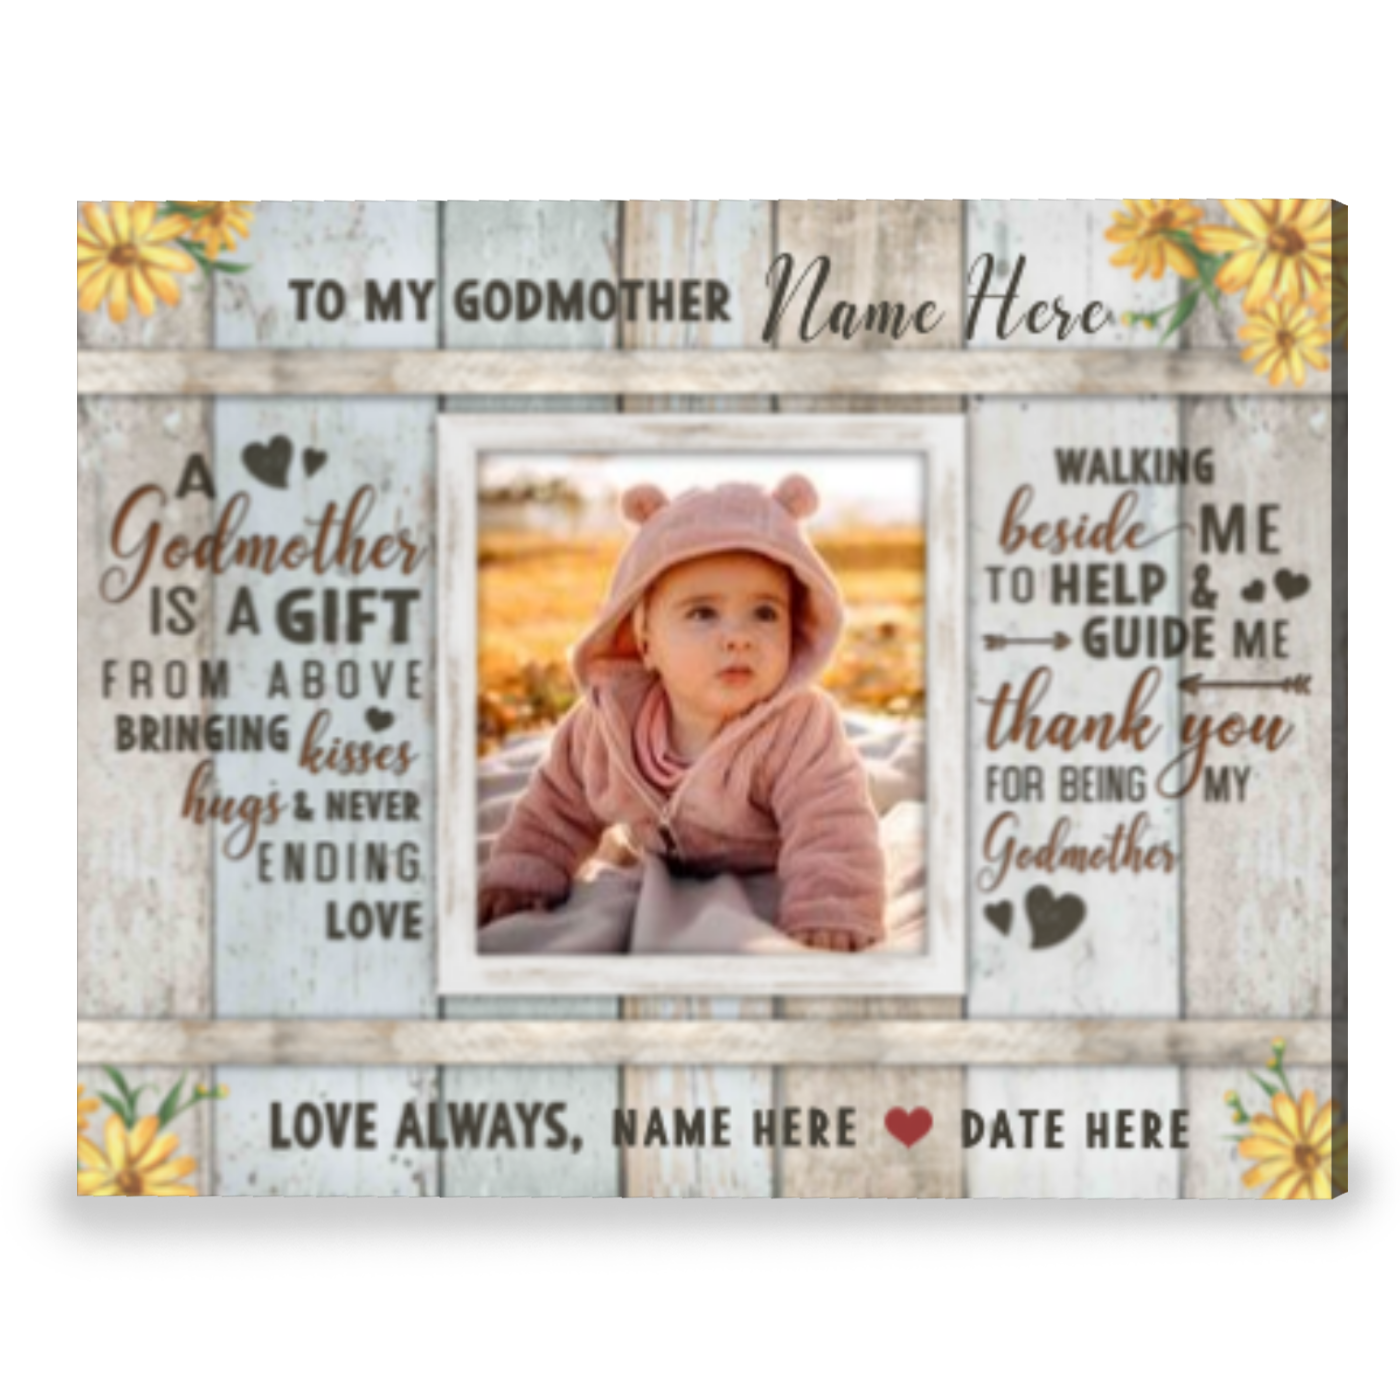 Customized To My God Mother Walking Beside Me To Help And Guide Me Canvas, Personalized Gift For Mother